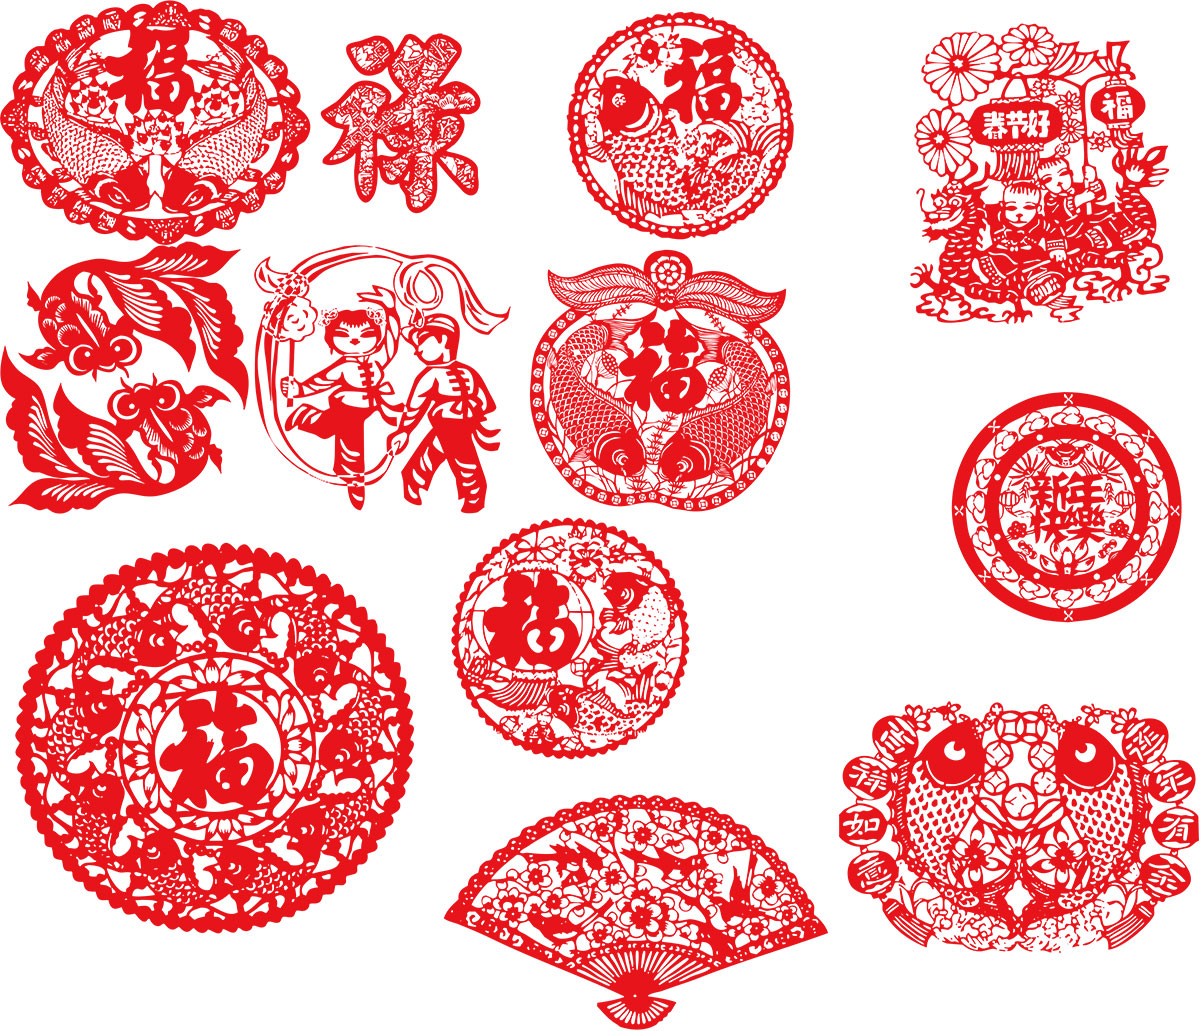 Chinese paper-cutting art Vector